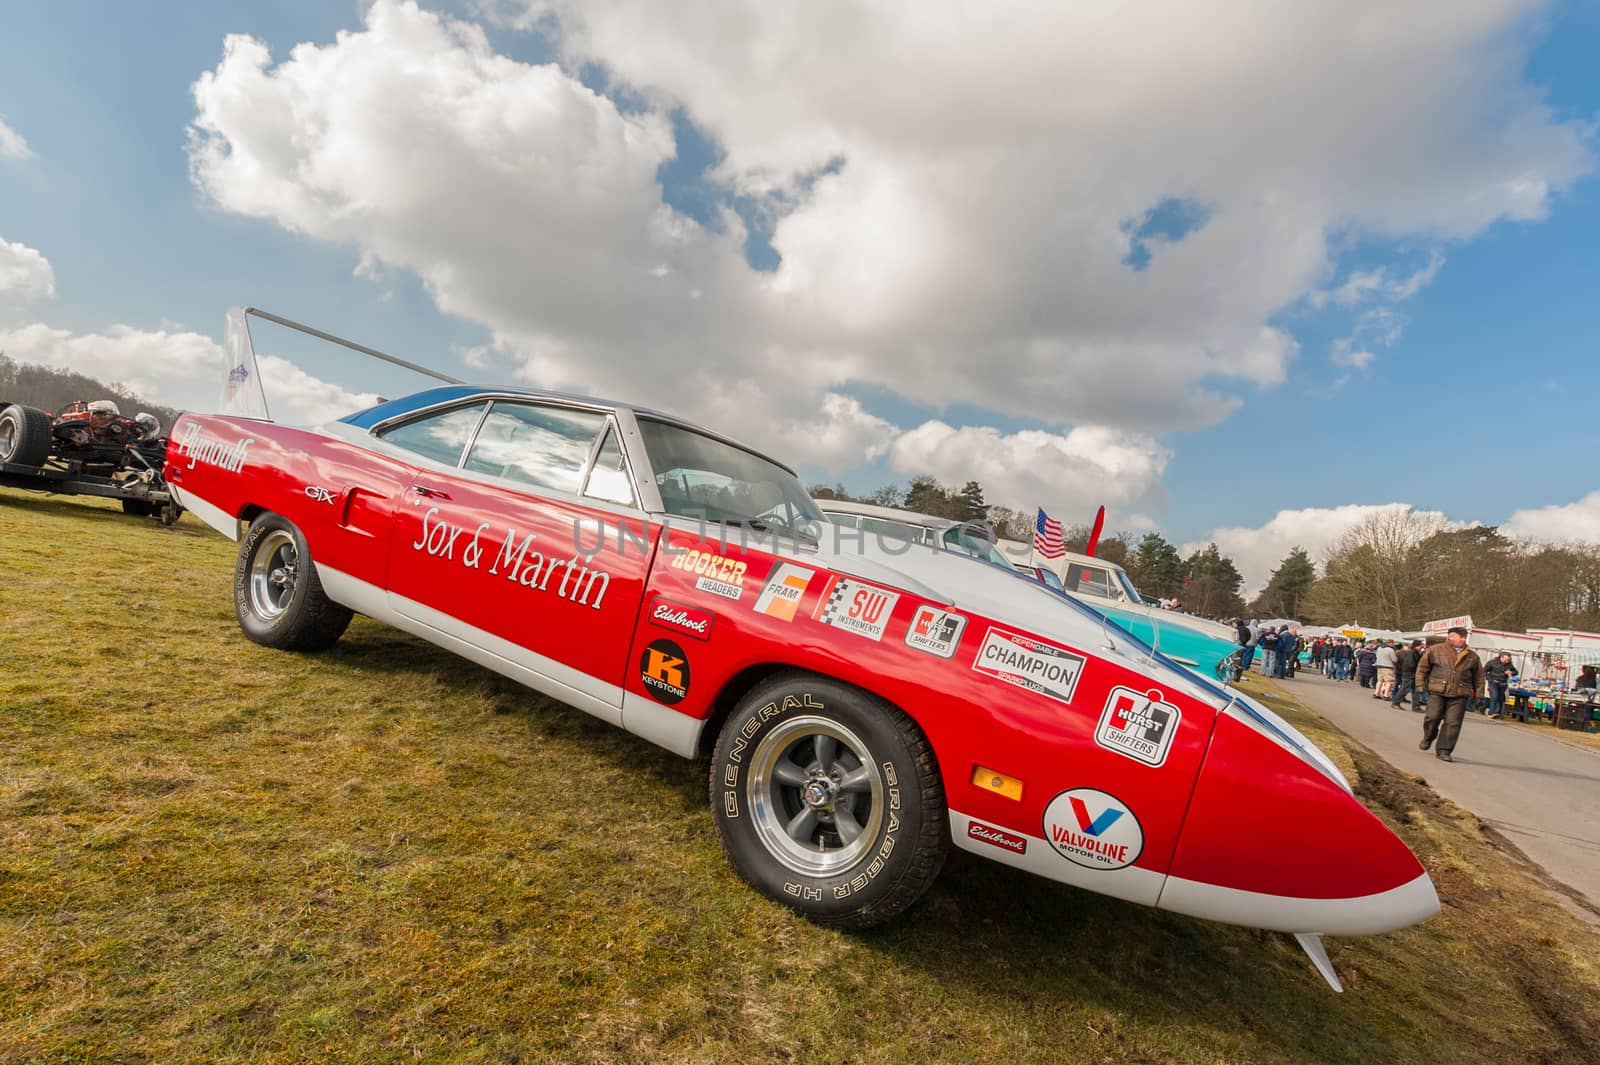 Farnborough, UK - March 29, 2013: Sox and Martin Plymouth GTX dragster on display at the annual Wheels Day auto and bike show in Farnborough, UK